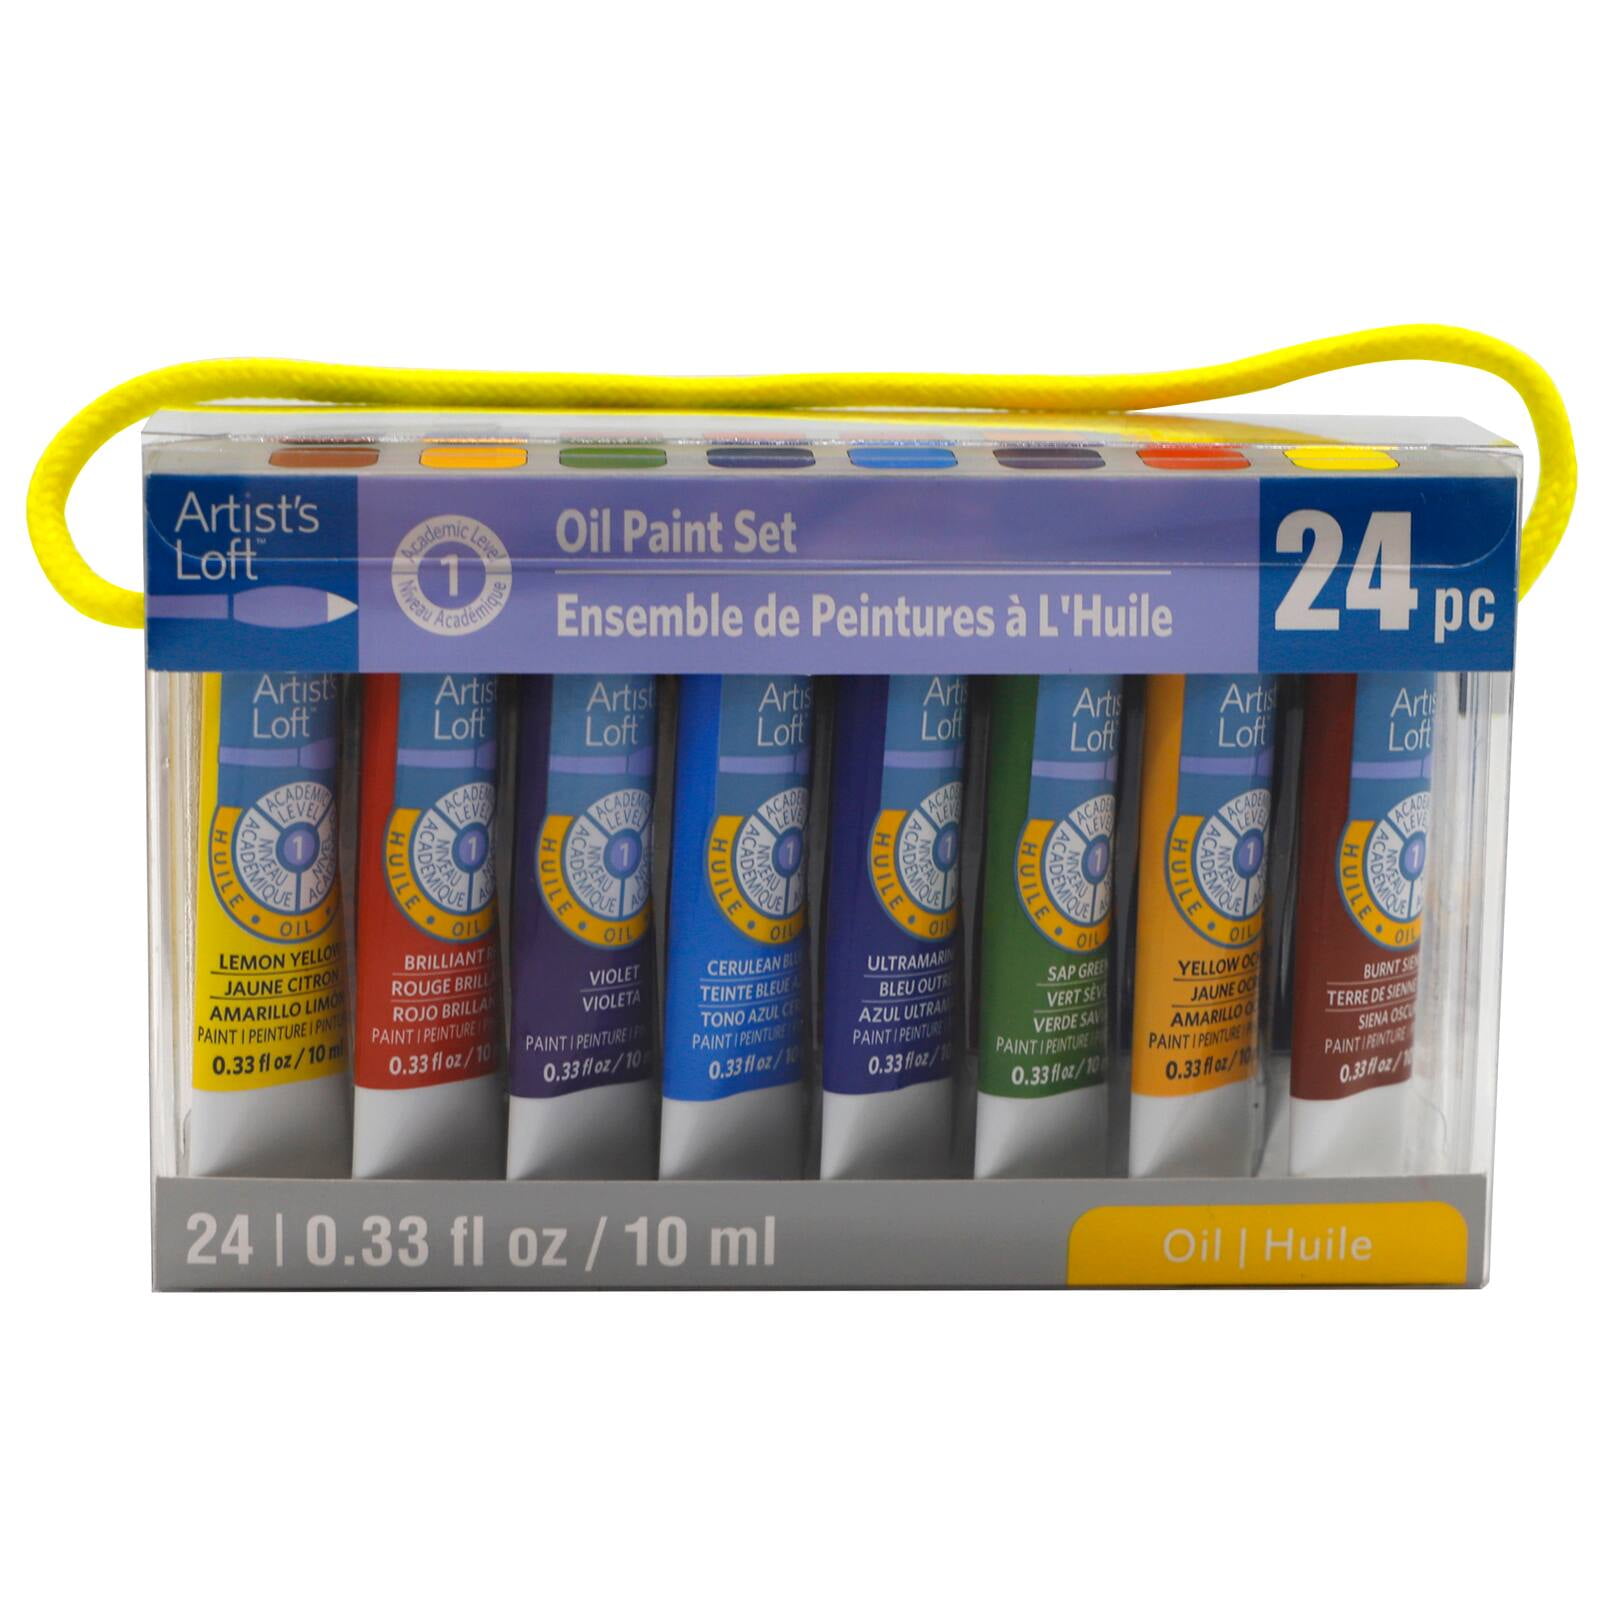 12 Packs: 6 Ct. (72 Total) Metallic Acrylic Paint Set by Artist's Loft, Size: 4.06, Assorted